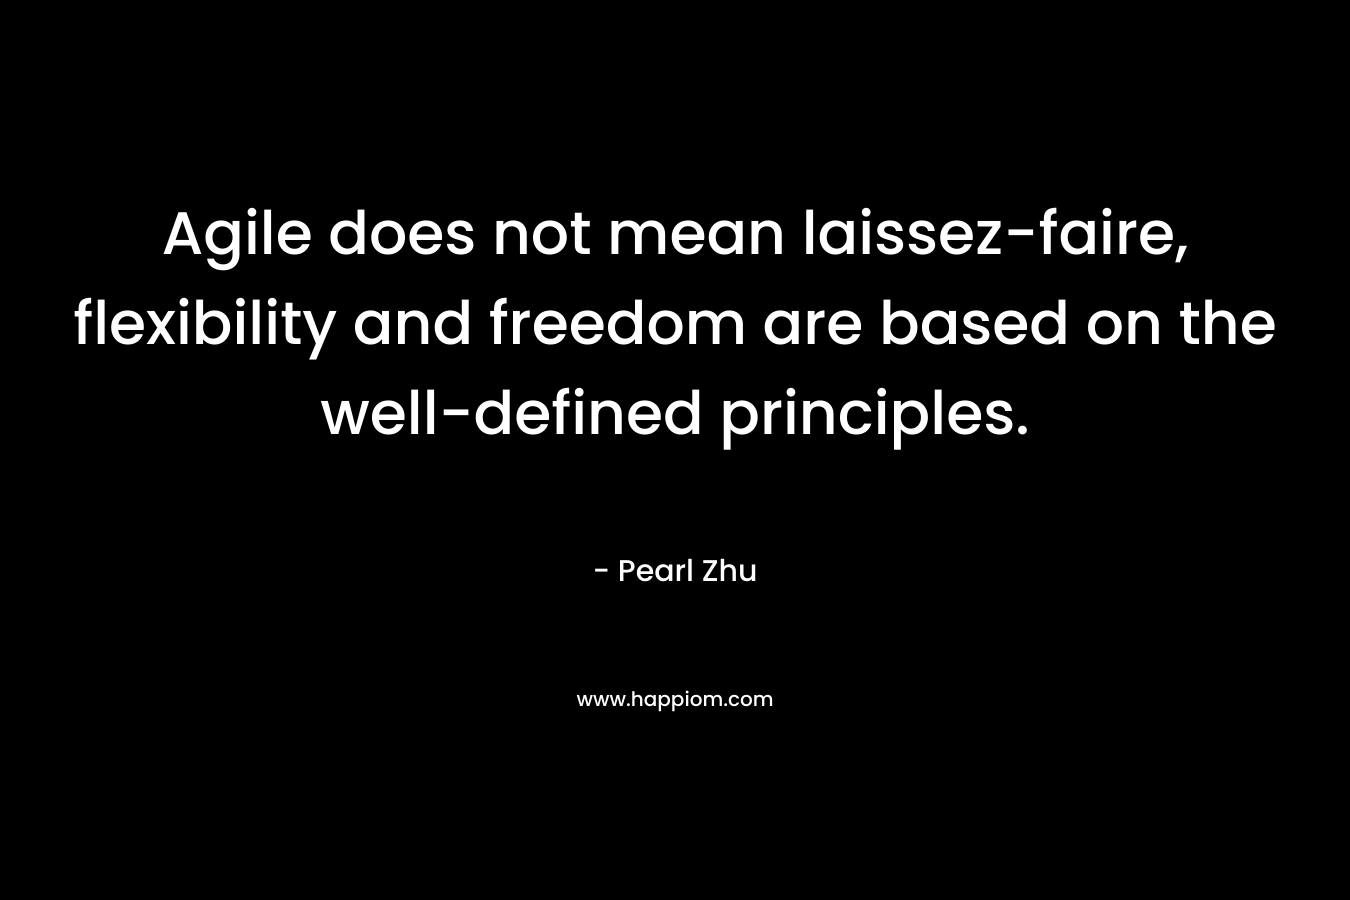 Agile does not mean laissez-faire, flexibility and freedom are based on the well-defined principles. – Pearl Zhu